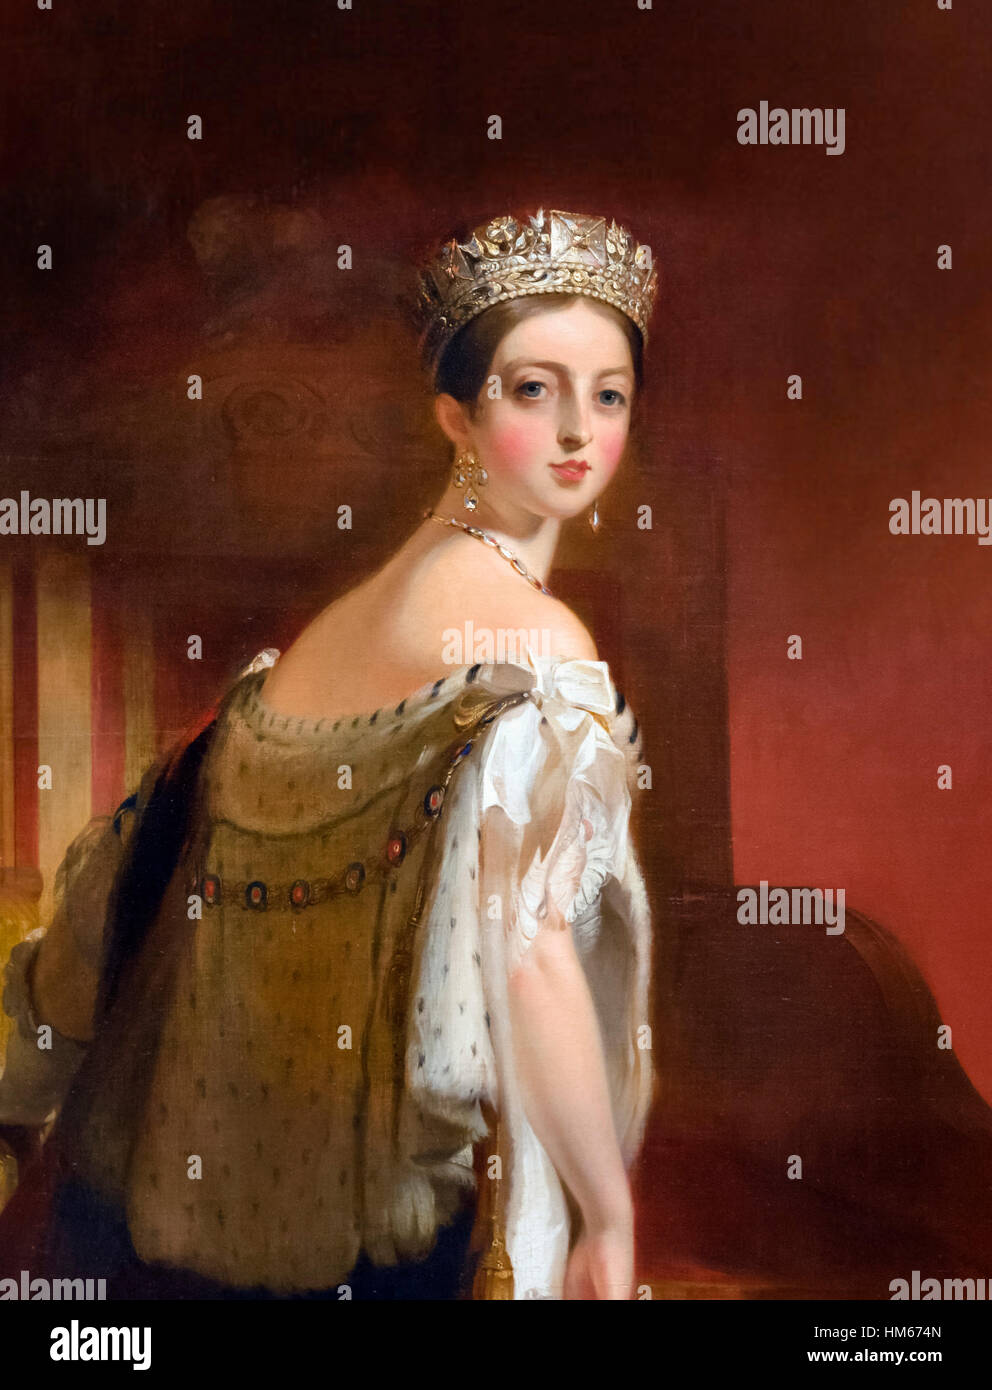 Queen Victoria, portrait by Thomas Sully, oil on canvas, 1838. Stock Photo